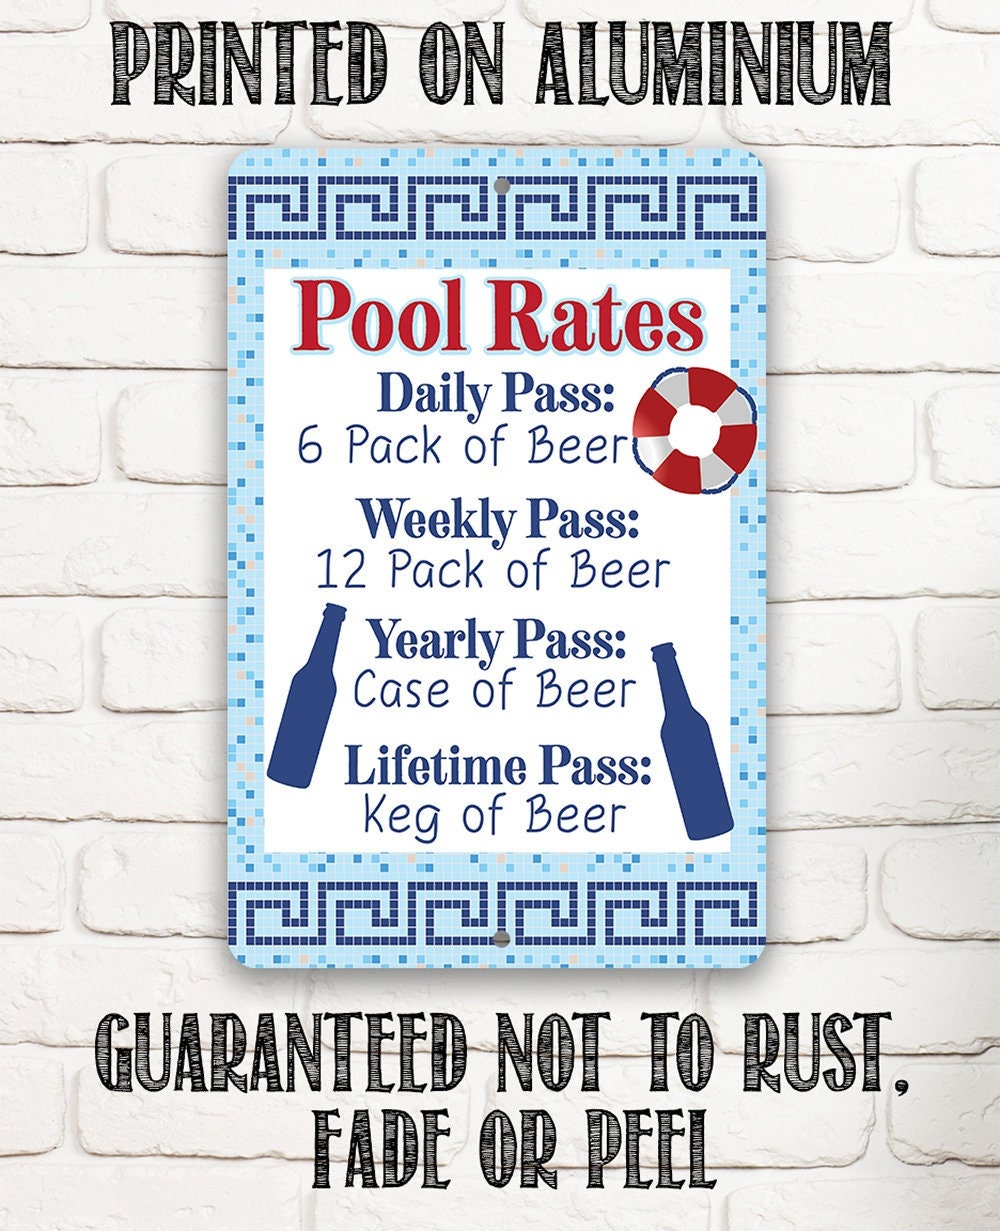 Pool Rates - 8" x 12" or 12" x 18" Aluminum Tin Awesome Metal Poster Lone Star Art 